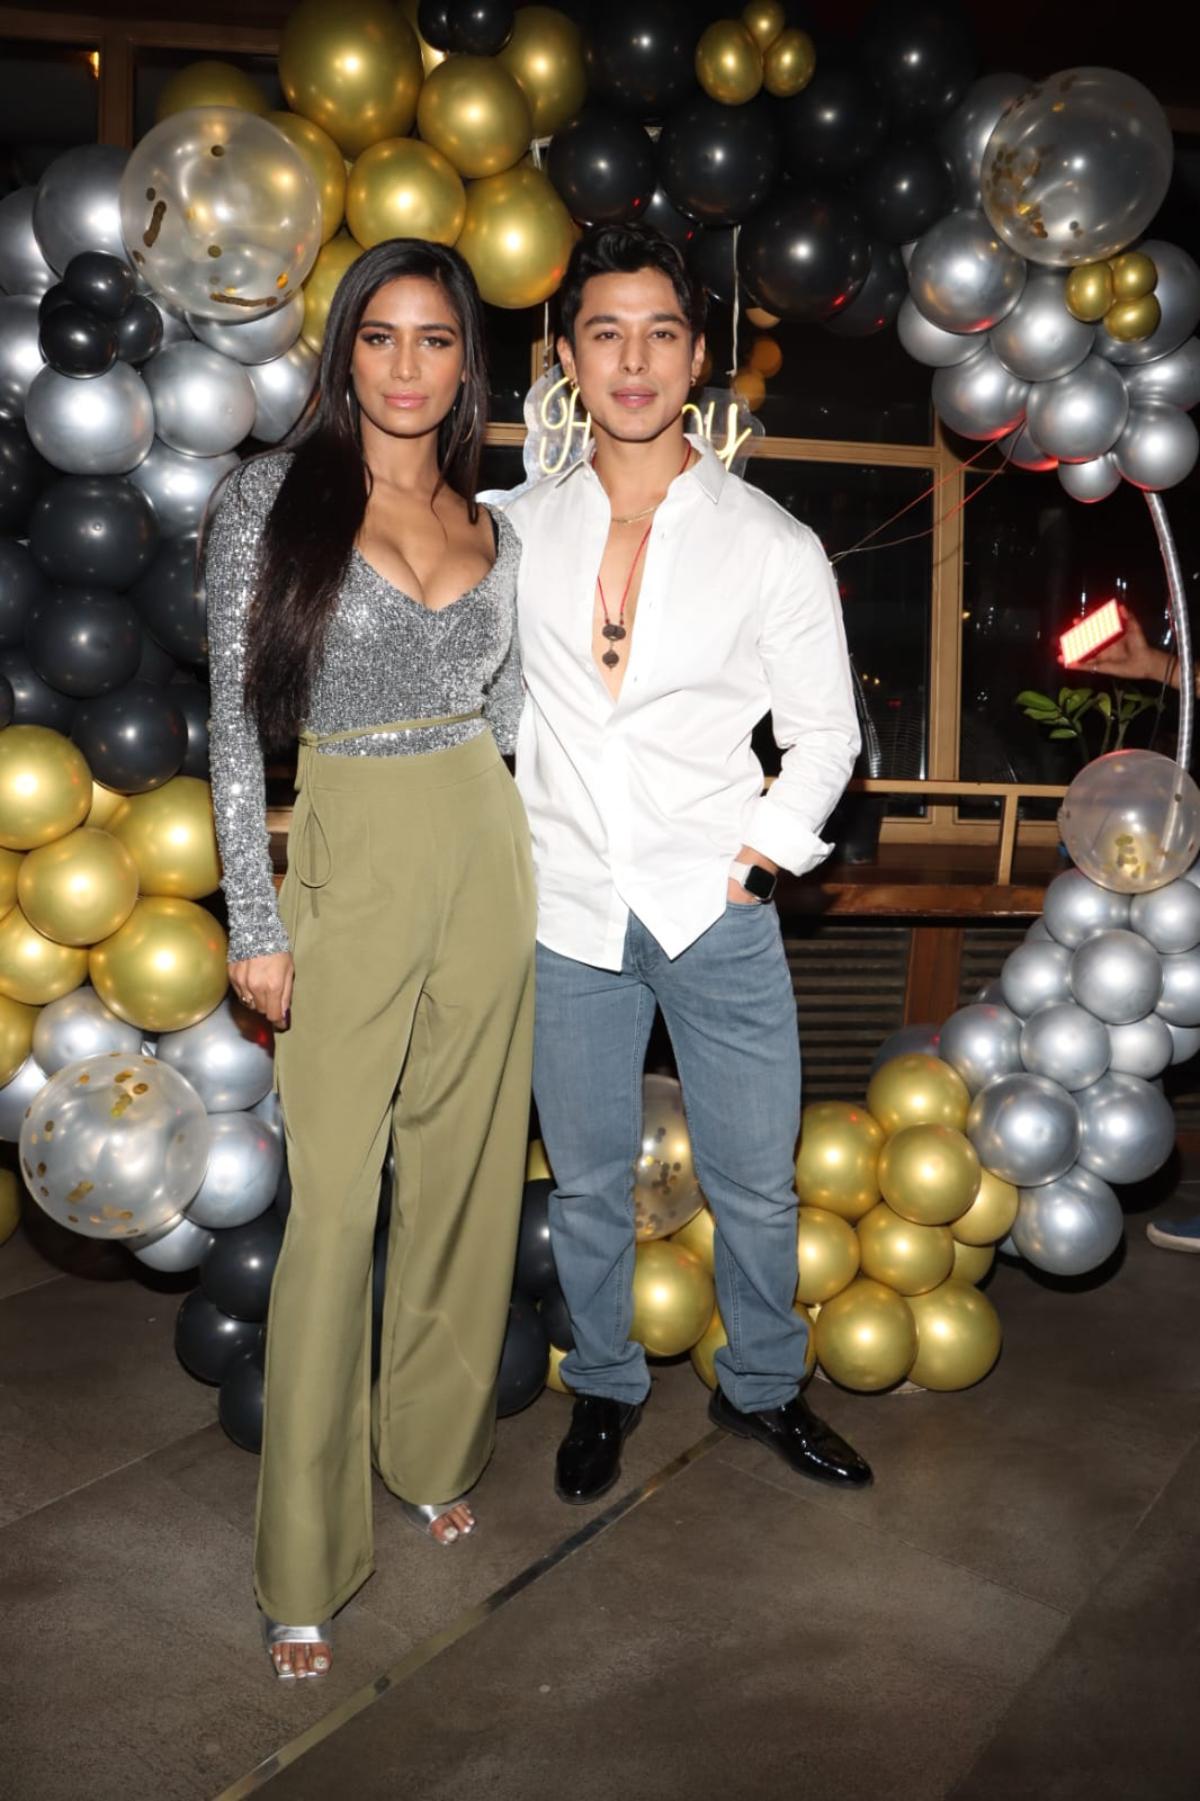 Among other celebrities, Poonam Pandey who was last seen in reality show, 'Lock Upp' too was spotted at Pratik's birthday party. 